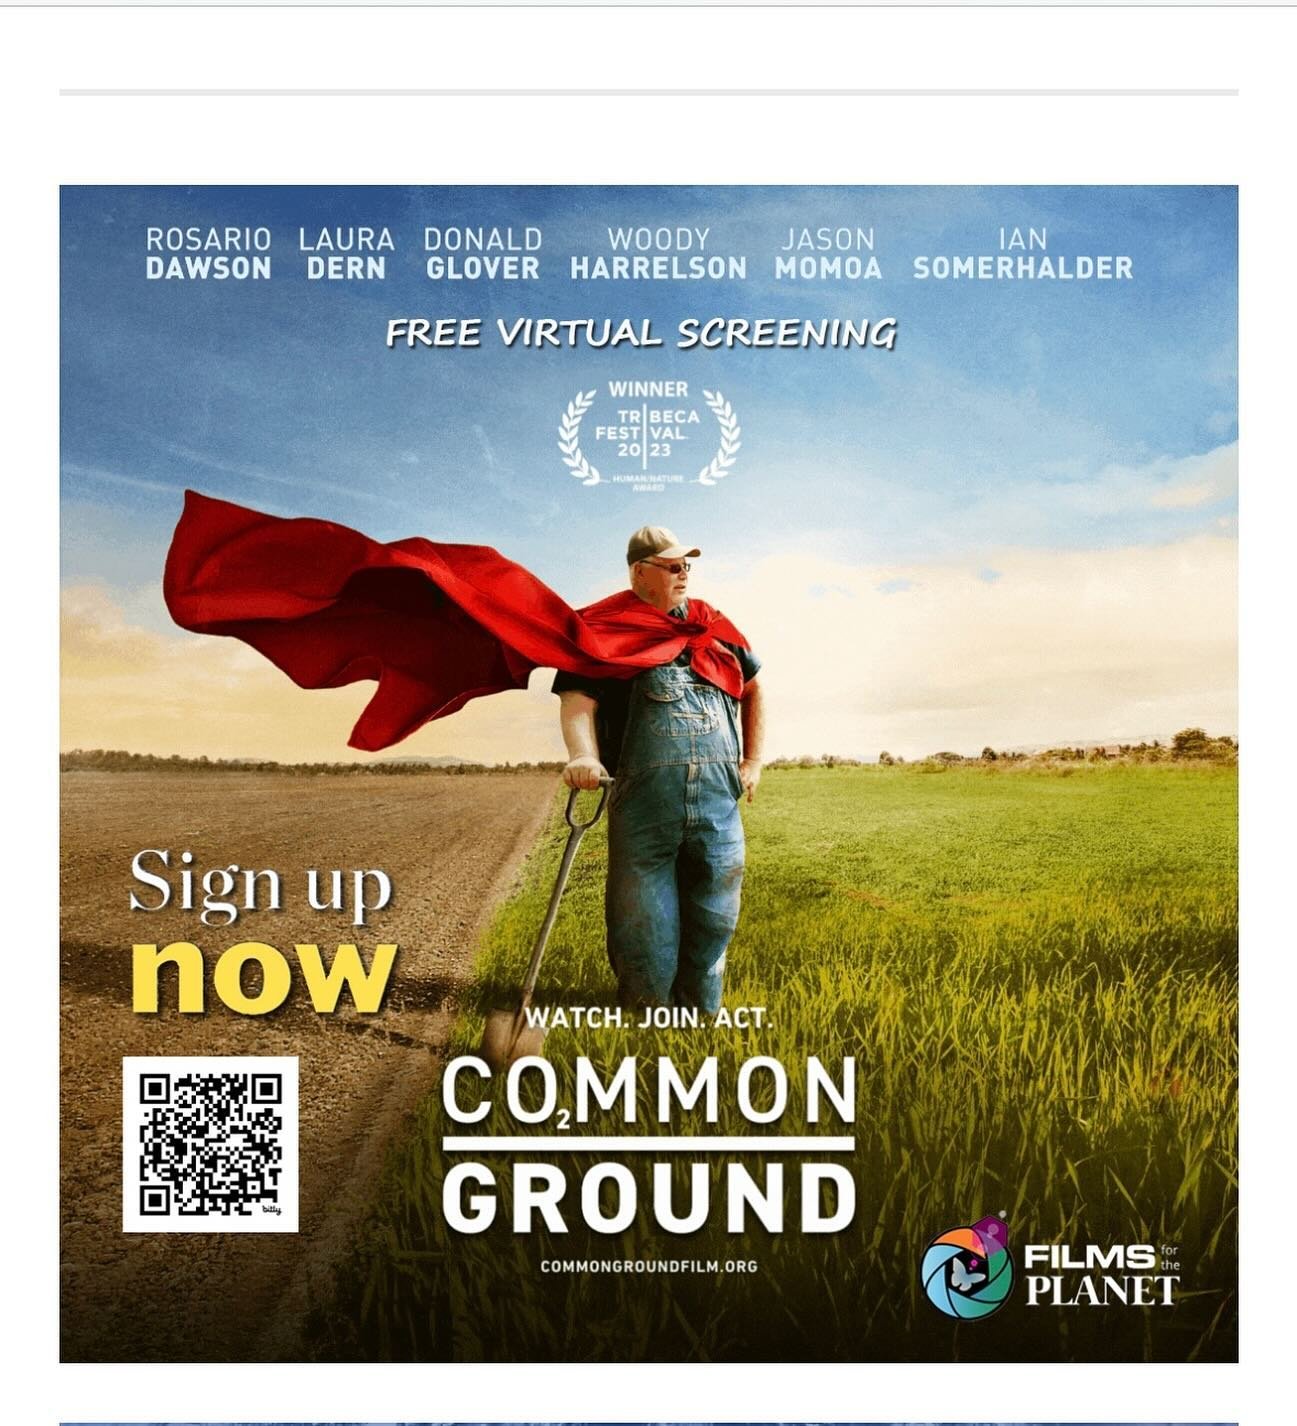 A free online screening of the new movie Common Ground is available May 3-8. This is a follow up to the movie Kiss the Ground, bringing insights on the importance of regenerative soil/farming. Link in bio to register and get steaming!